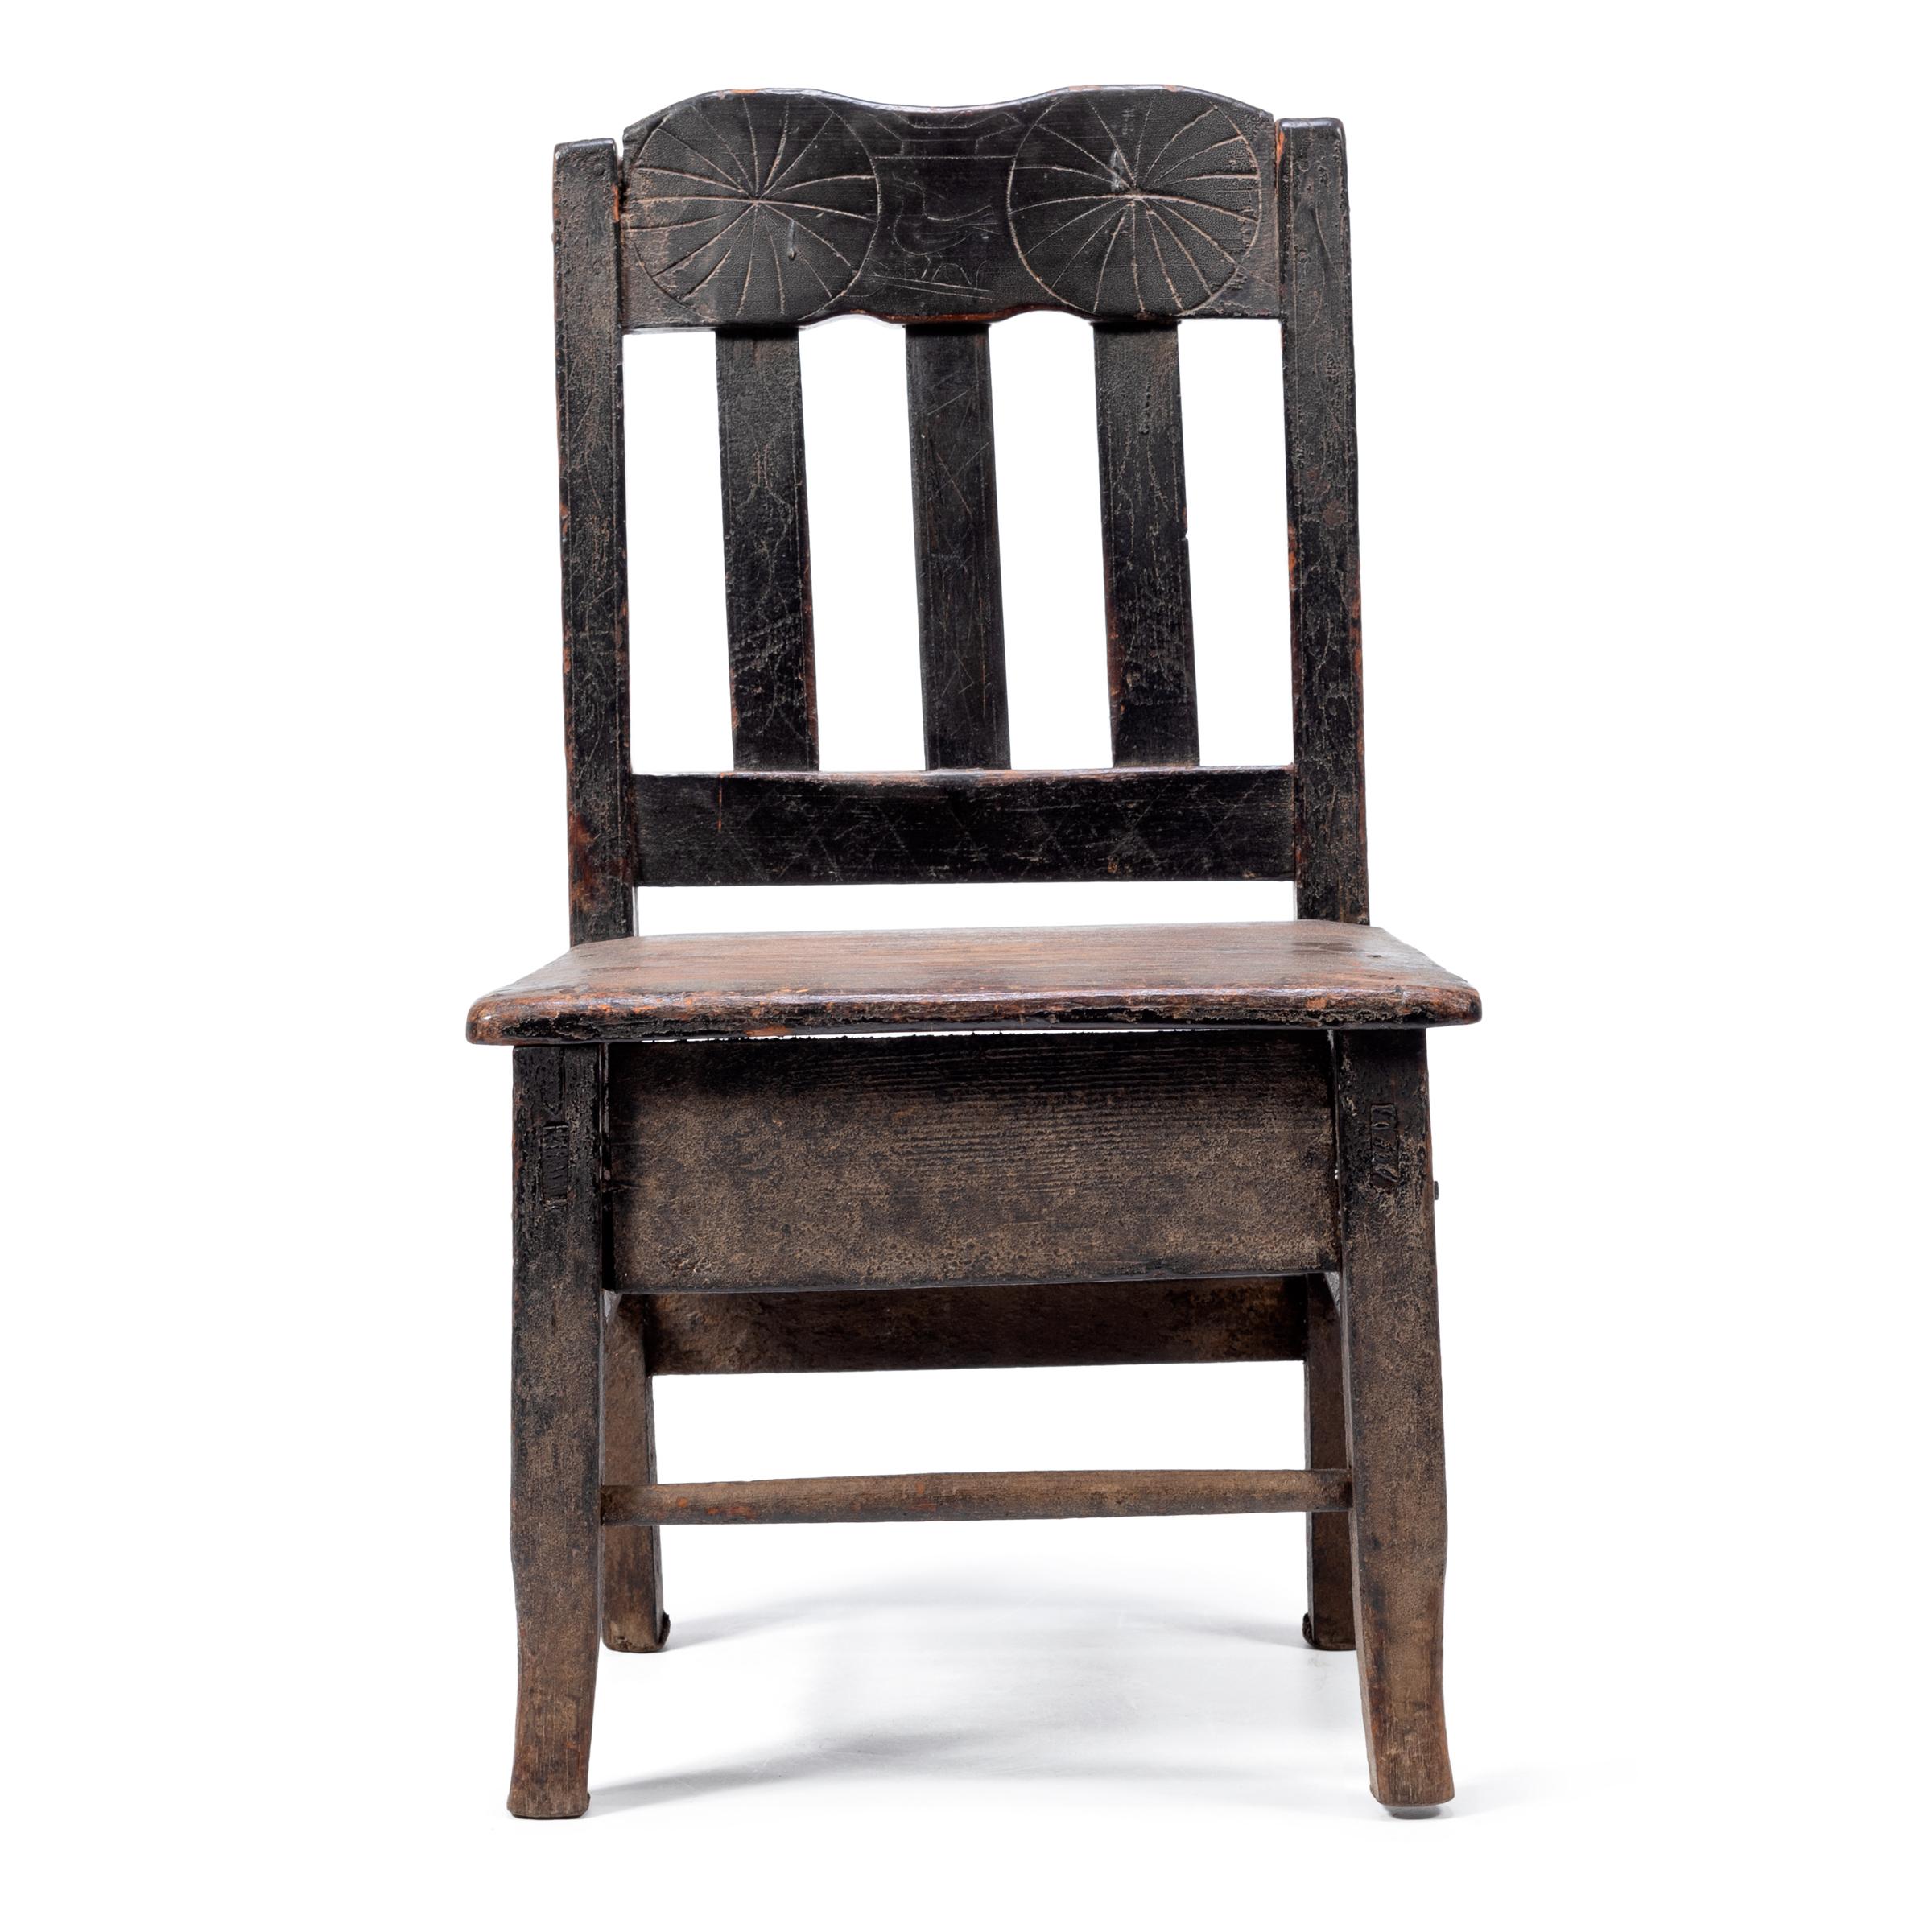 Crafted in the early 20th century, this petite Guatemalan children's chair charms with its playful asymmetry and richly textured surface. Influenced by Spanish Colonial furniture design, the chair has a slatted back carved with abstract patterns and